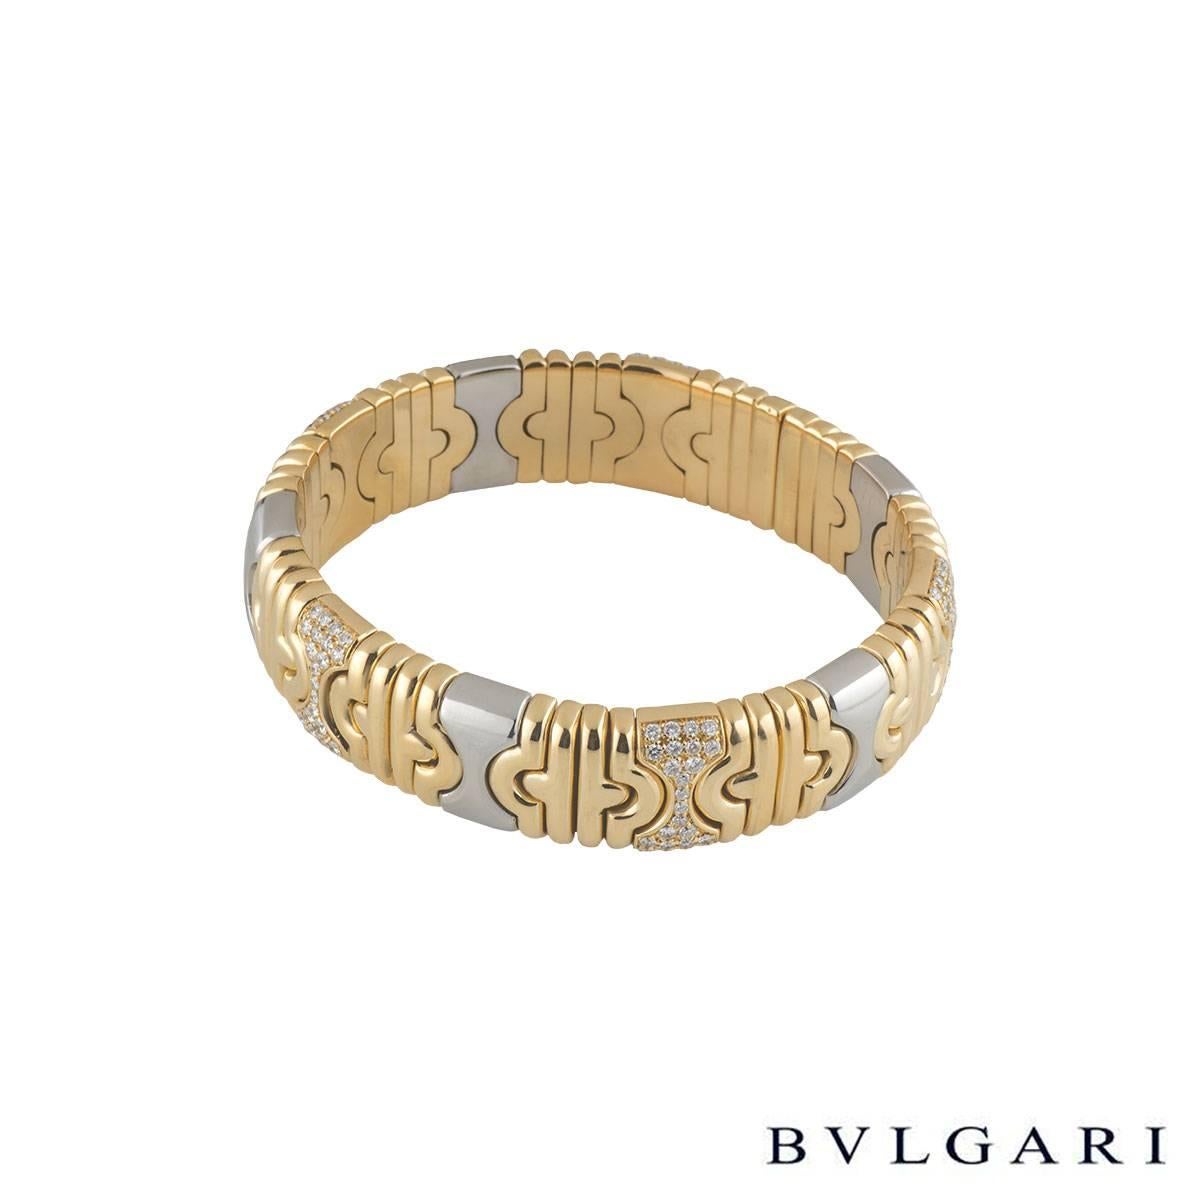 A unique stainless steel and 18k yellow gold diamond Bvlgari bangle from the Parentesi collection. The bangle comprises of alternating plain and diamond set geometrical design intersections like the iconic parentesi design. There are 120 diamonds